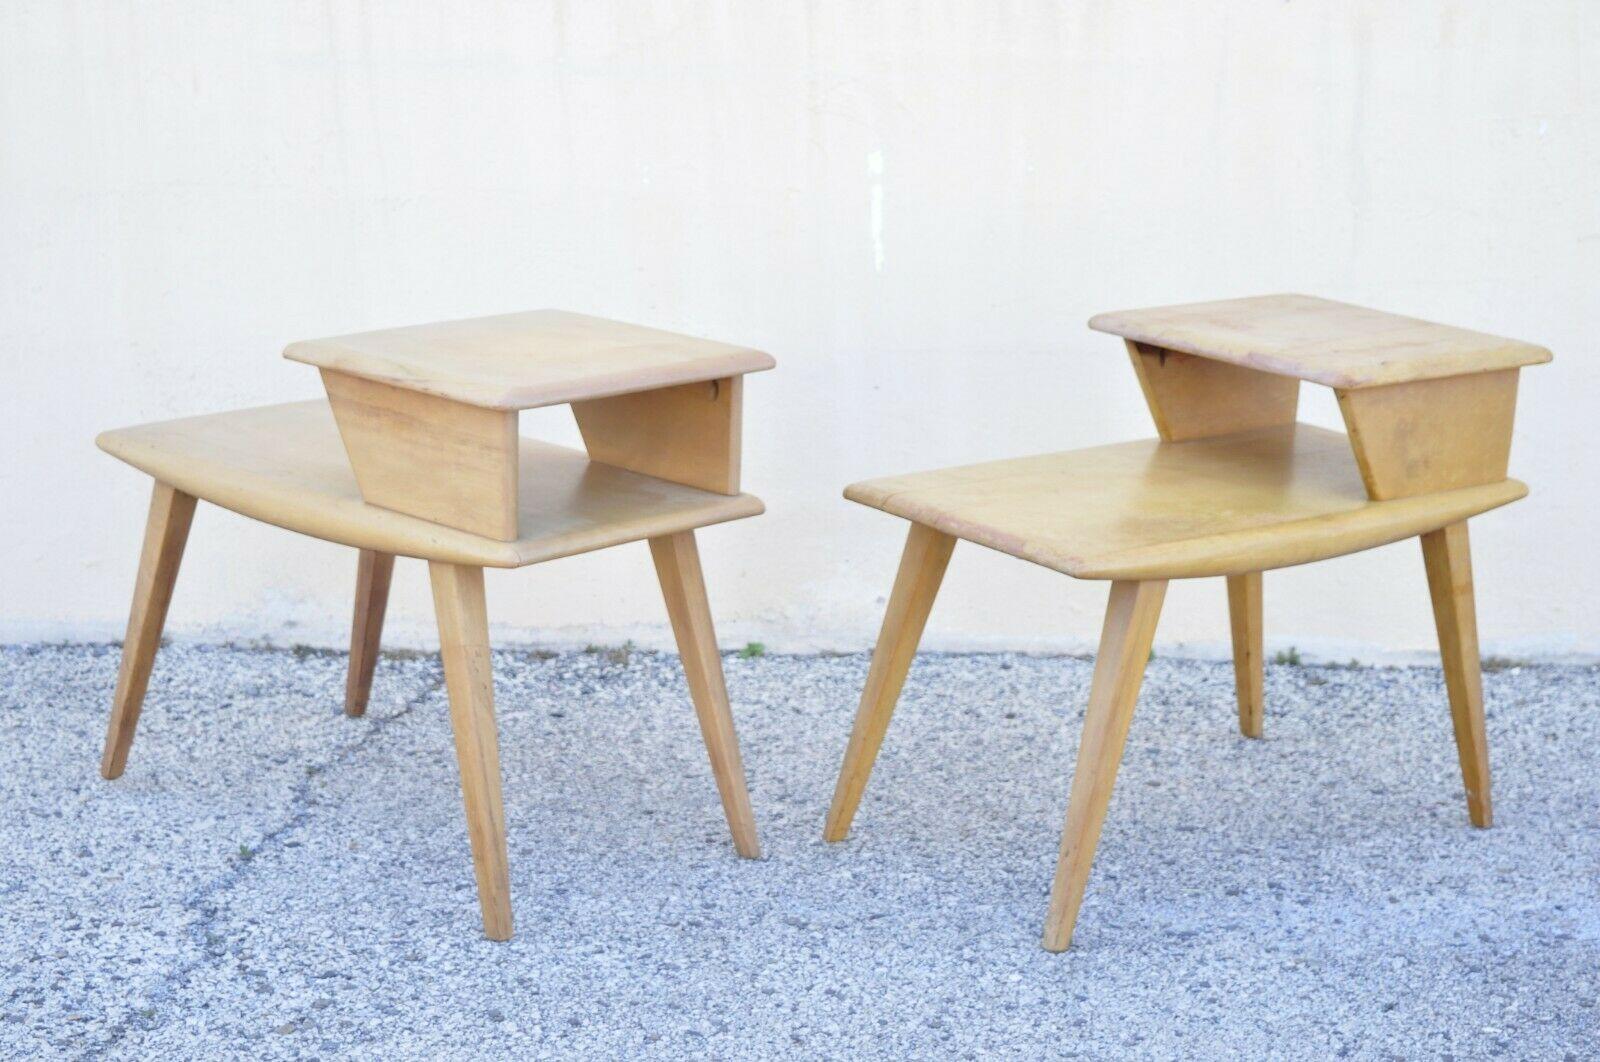 Vintage Heywood Wakefield Birch Maple champagne step end tables - a pair . Item features a solid wood construction, beautiful wood grain, original stamp, tapered legs, very nice vintage pair, great project to bring back to life. Circa Mid 20th